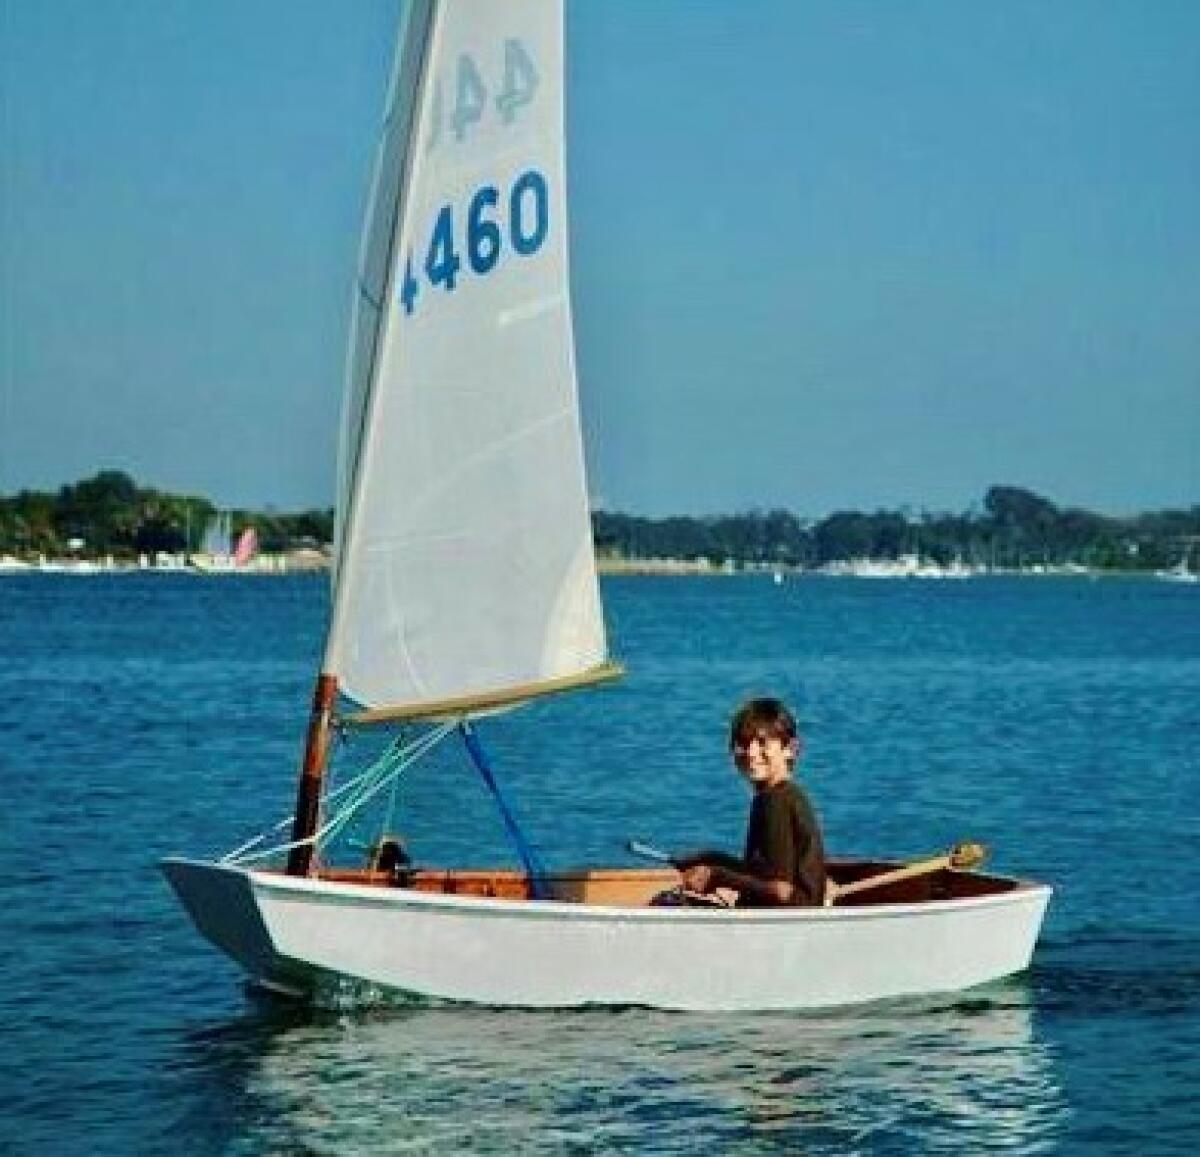 Thomas Schibler rides in Sabot 4460, made by Brian Thomas 43 years earlier.